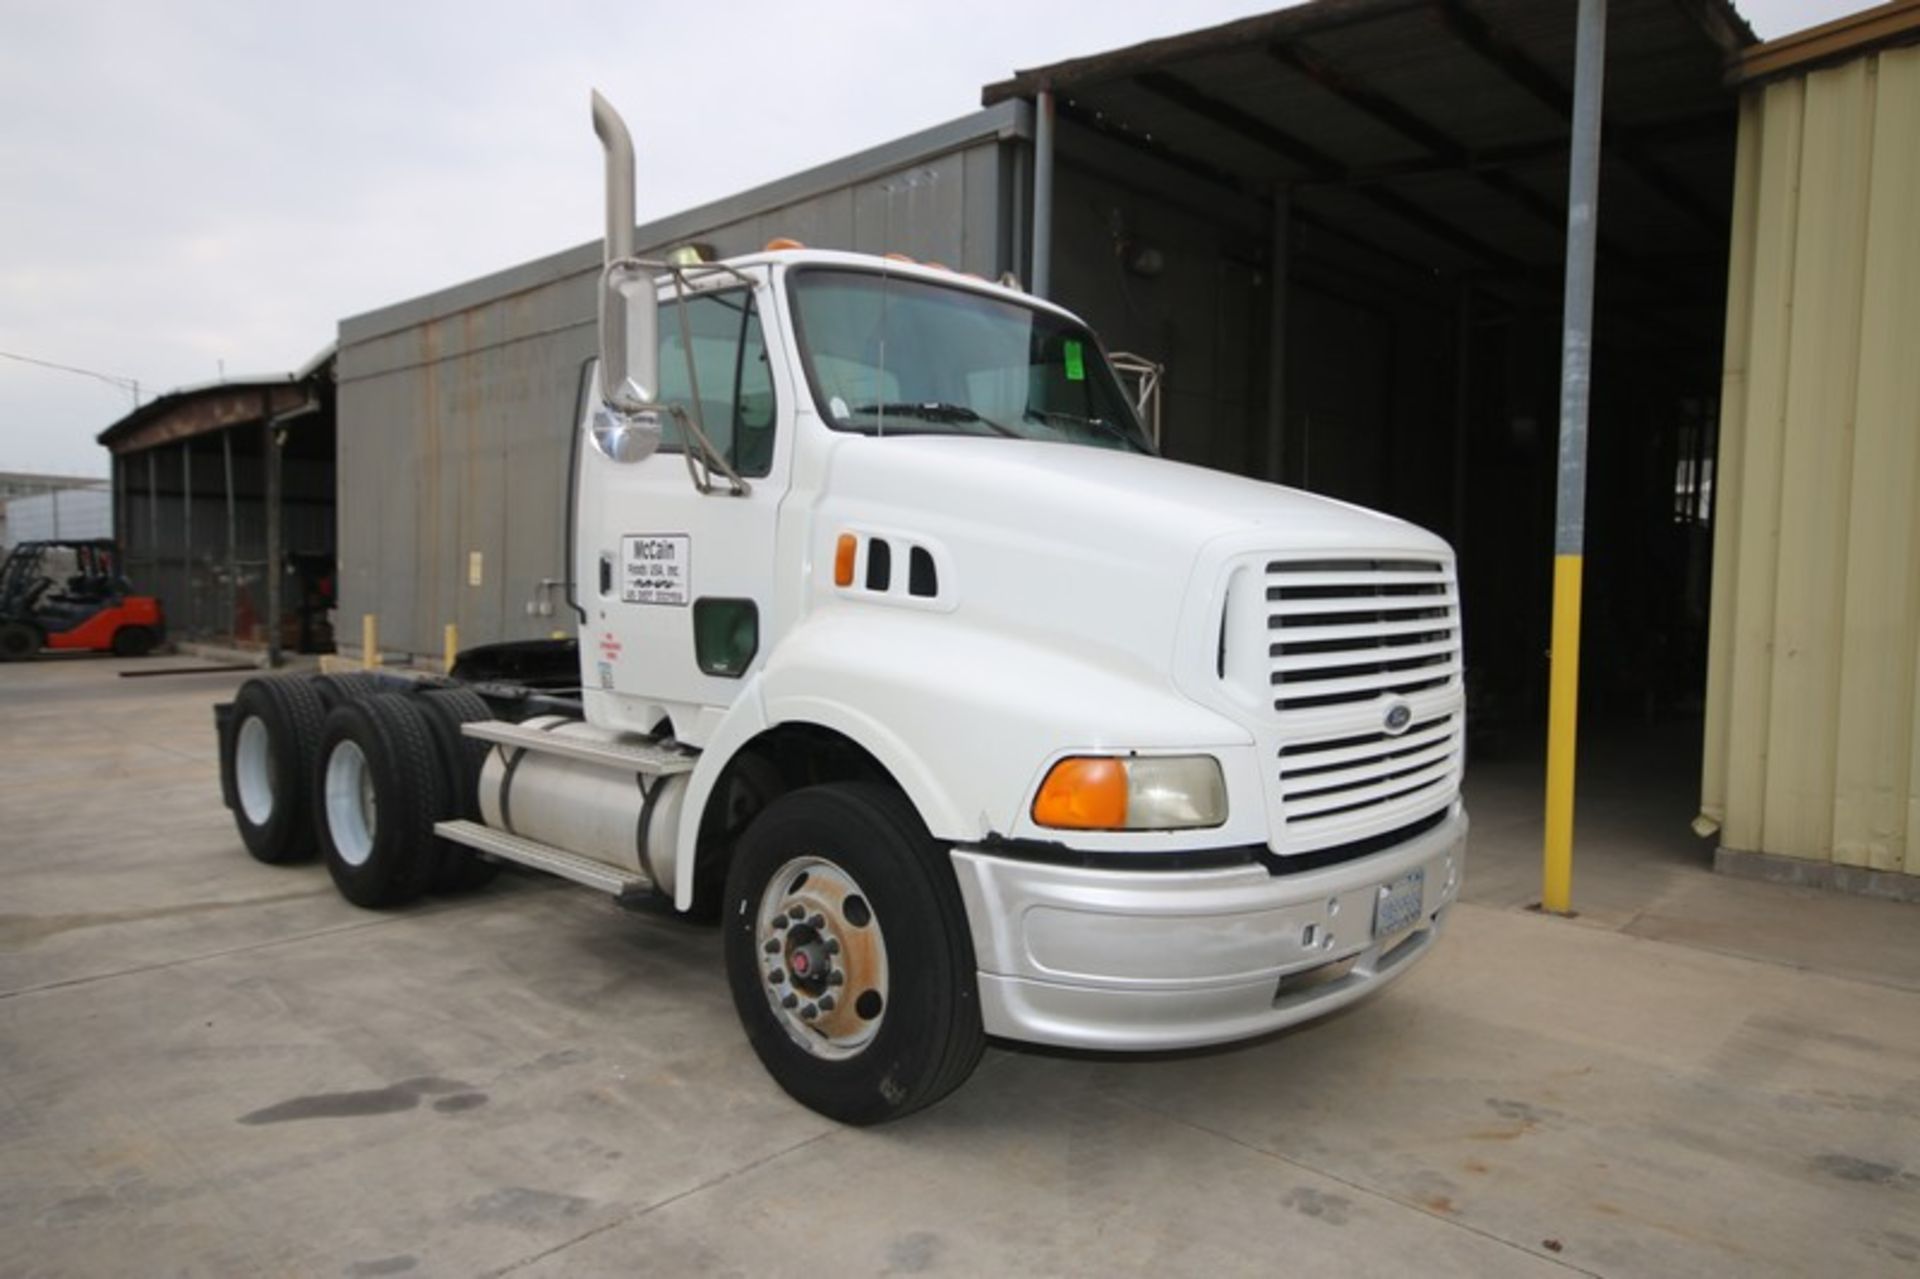 1997 Ford White Tractor, VIN #: 1FTYY96P6WVA24660, Front GAWR: 12,000 lbs., GVWR: 46,000 lbs., 283,